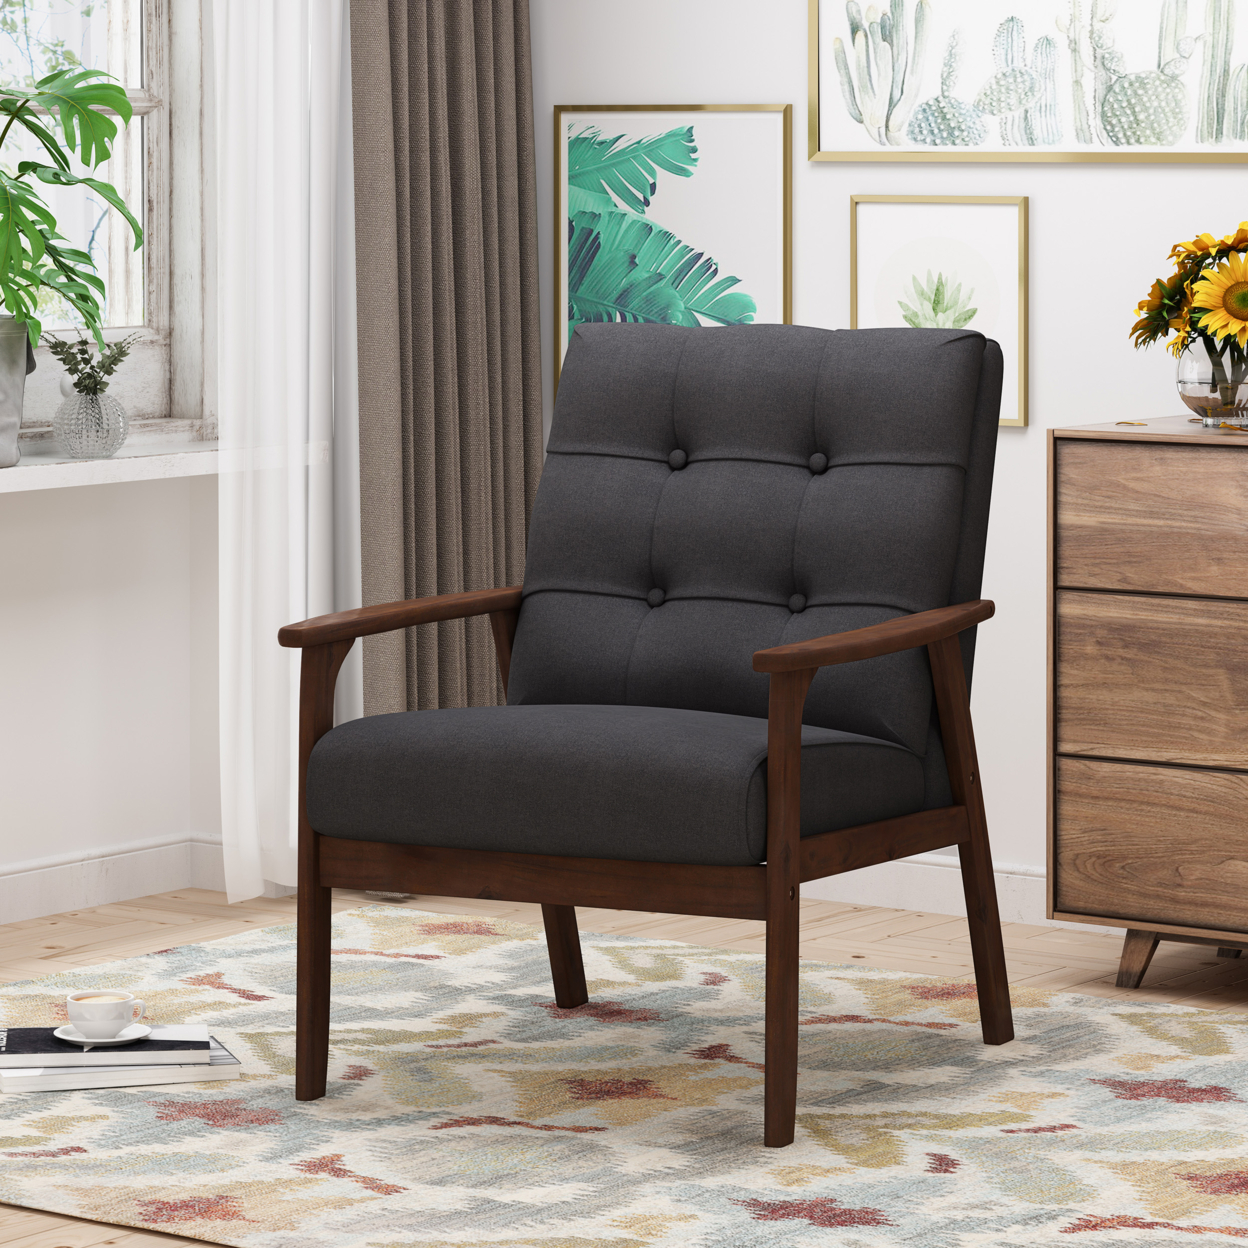 Norfolk Mid Century Waffle Stitch Tufted Accent Arm Chair With Rubberwood Legs - Single